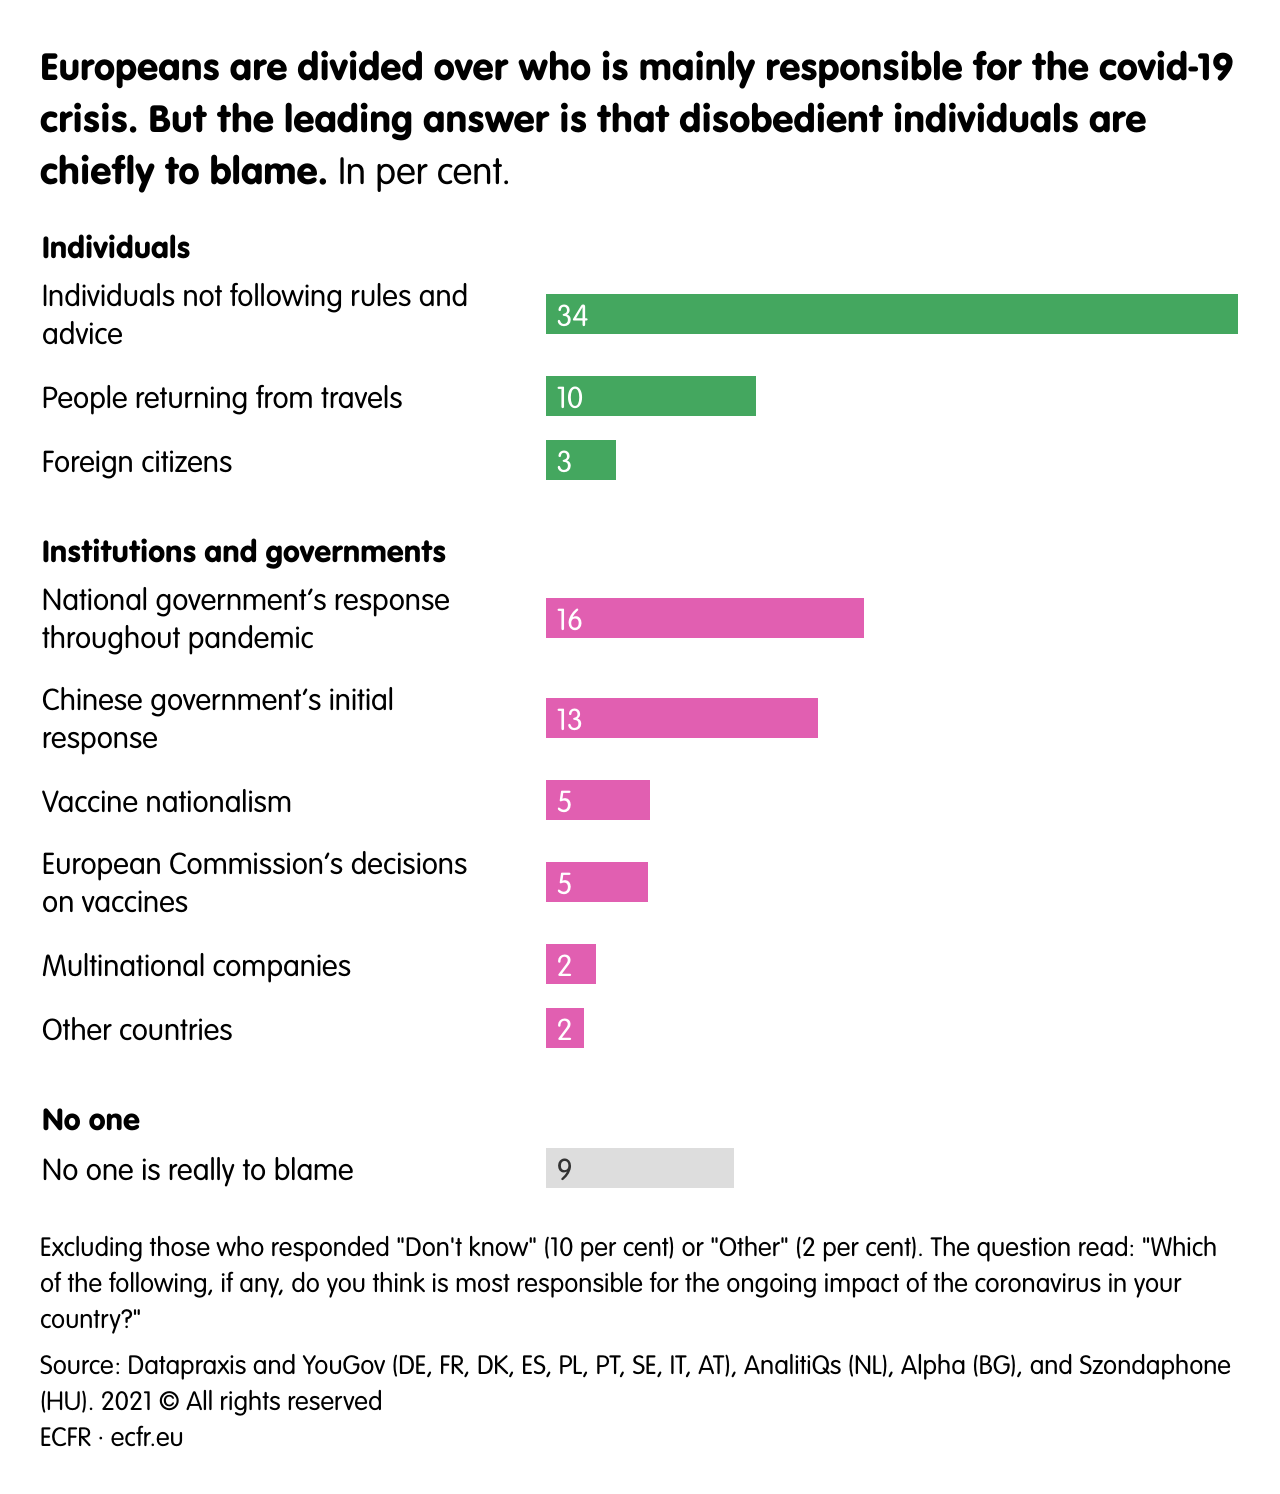 Europeans are divided over who is mainly responsible for the covid-19 crisis. But the leading answer is that disobedient individuals are chiefly to blame.